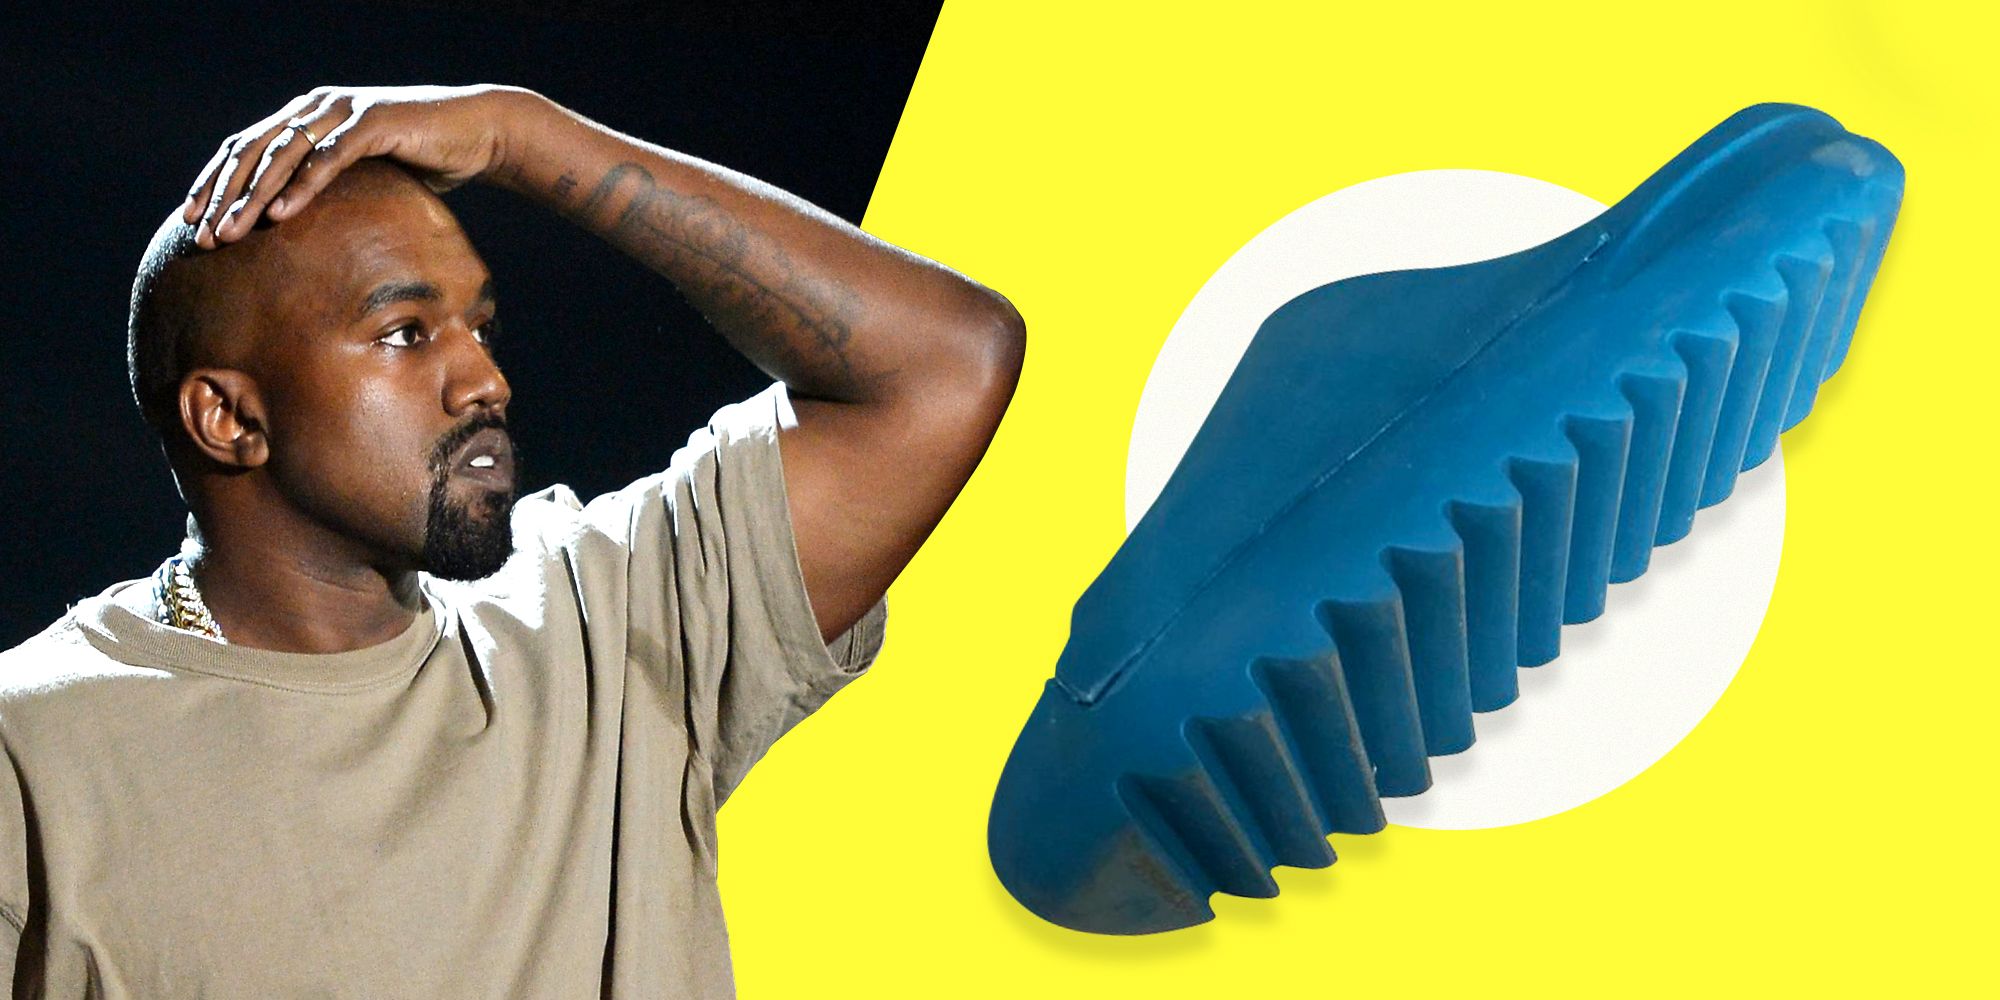 What are some good things about the Adidas Yeezy slides that Kanye